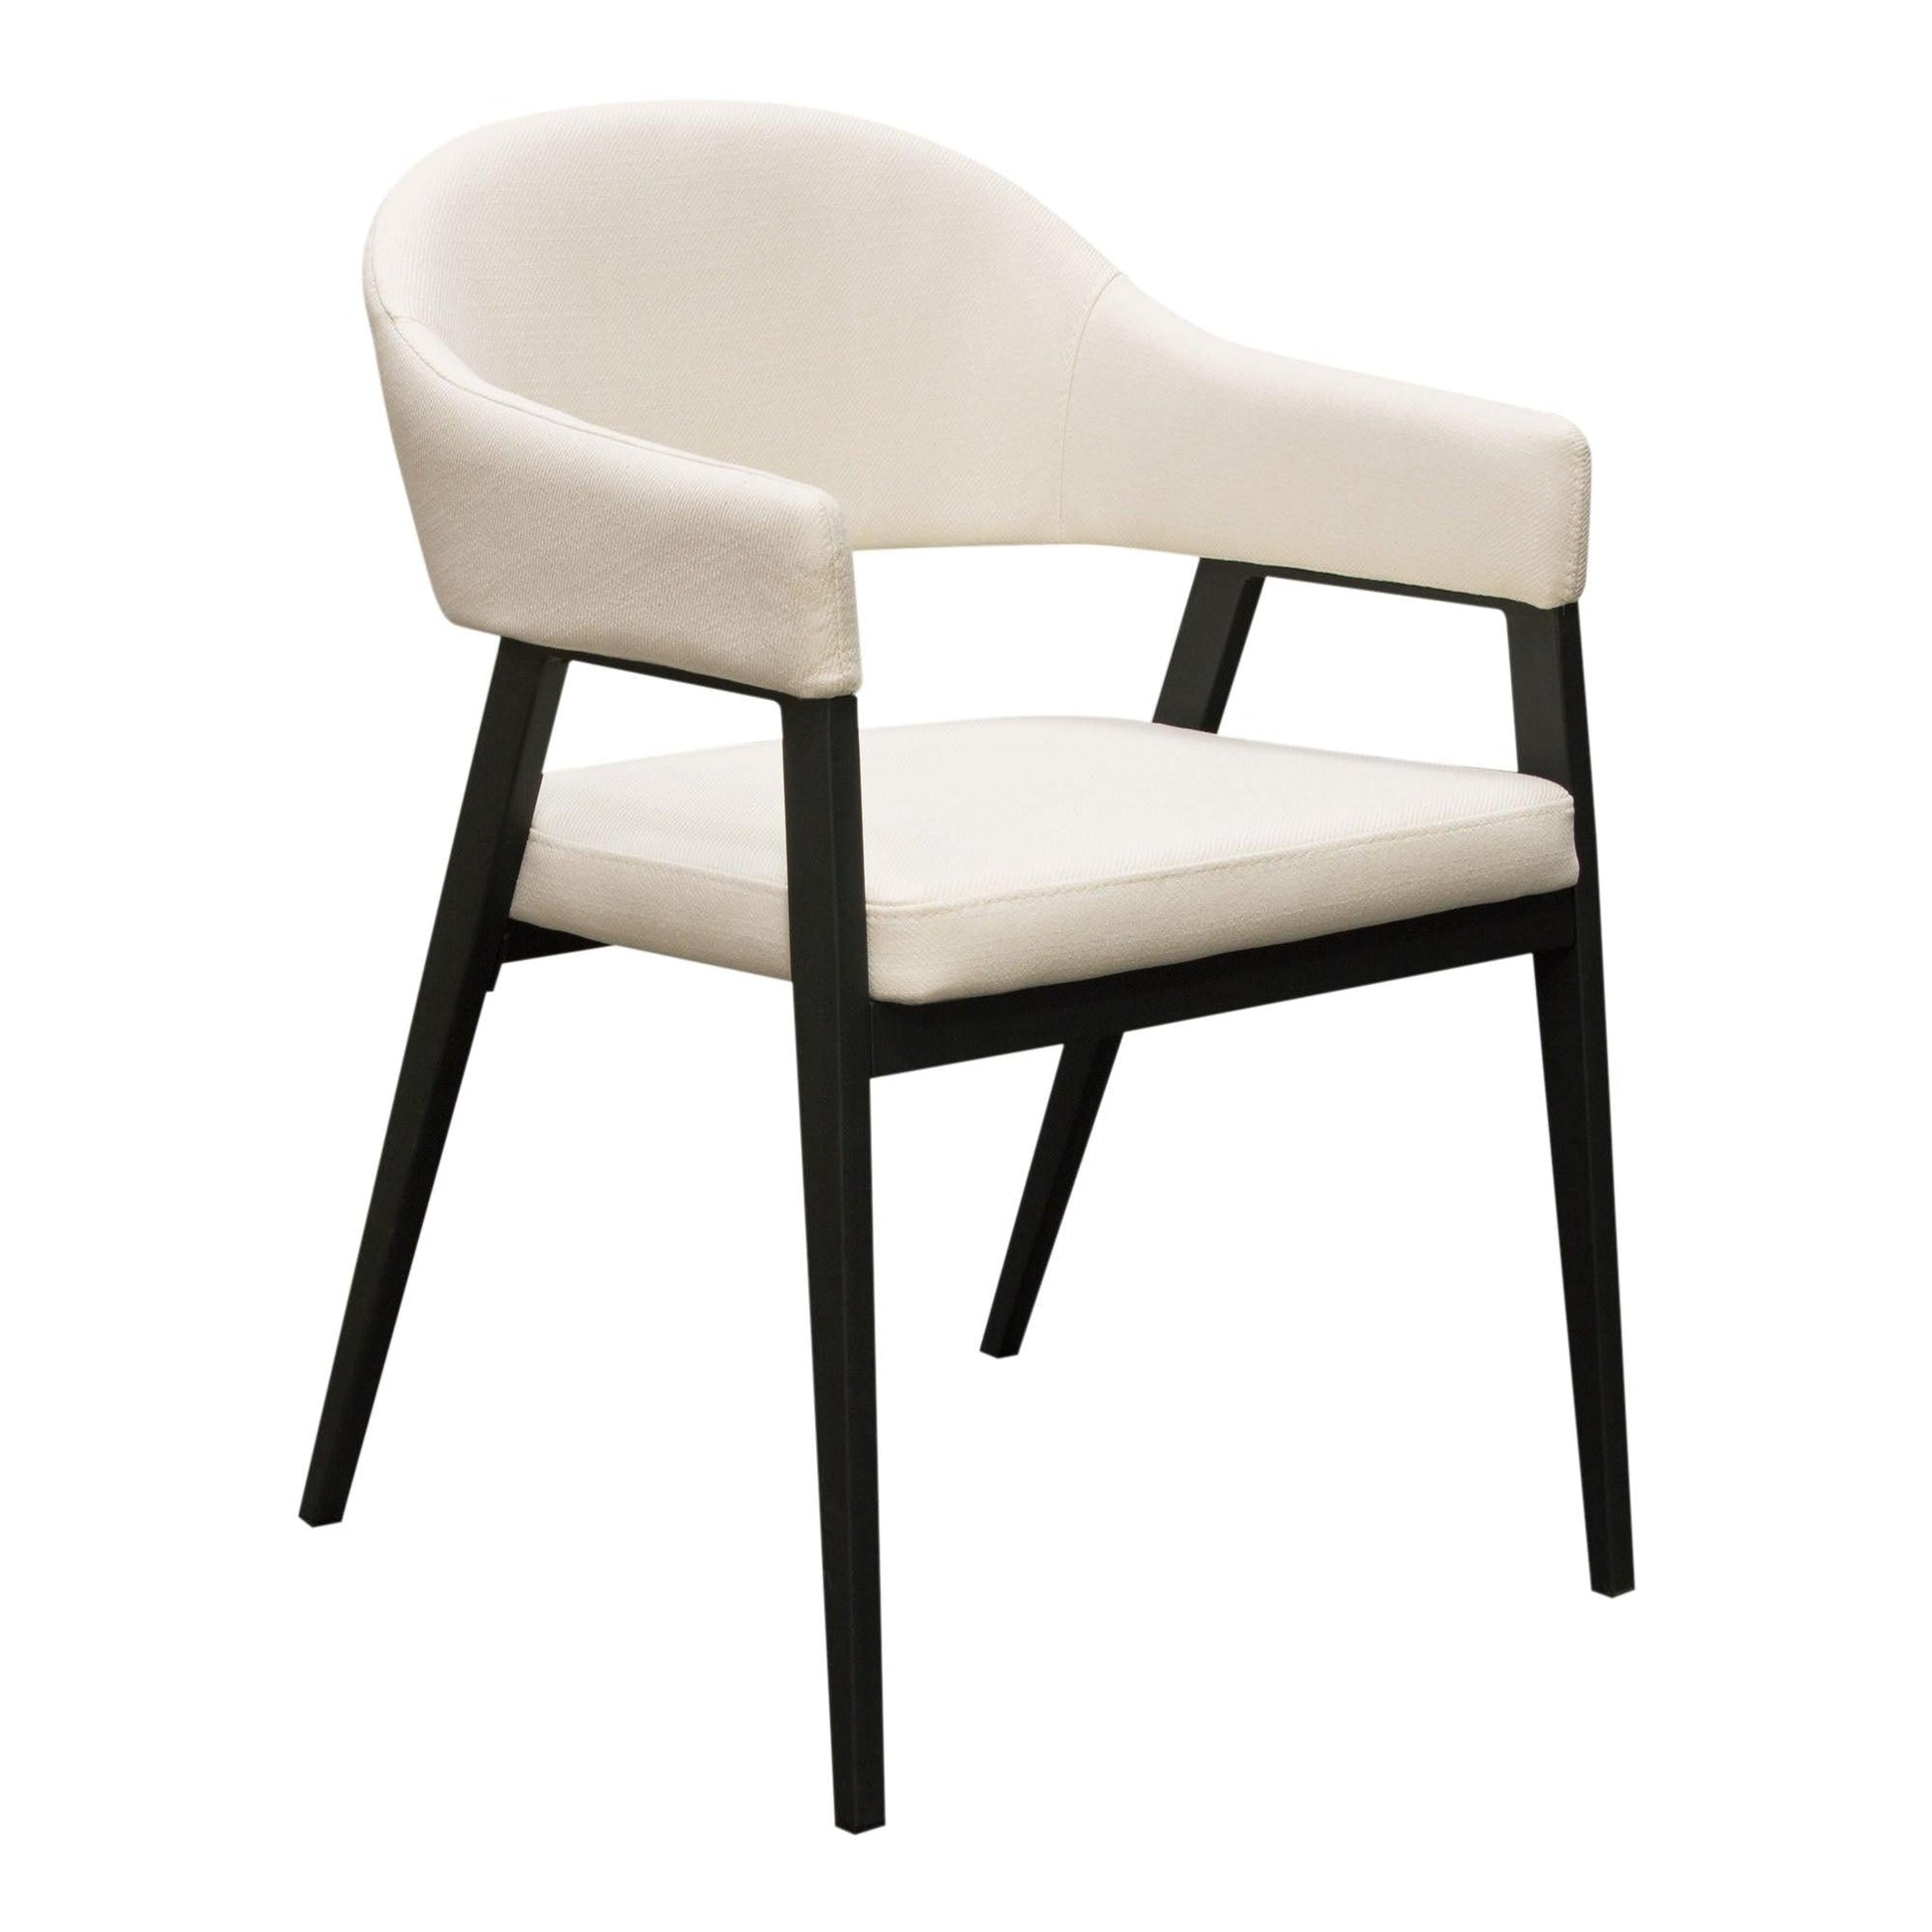 Adele Dining Chair 